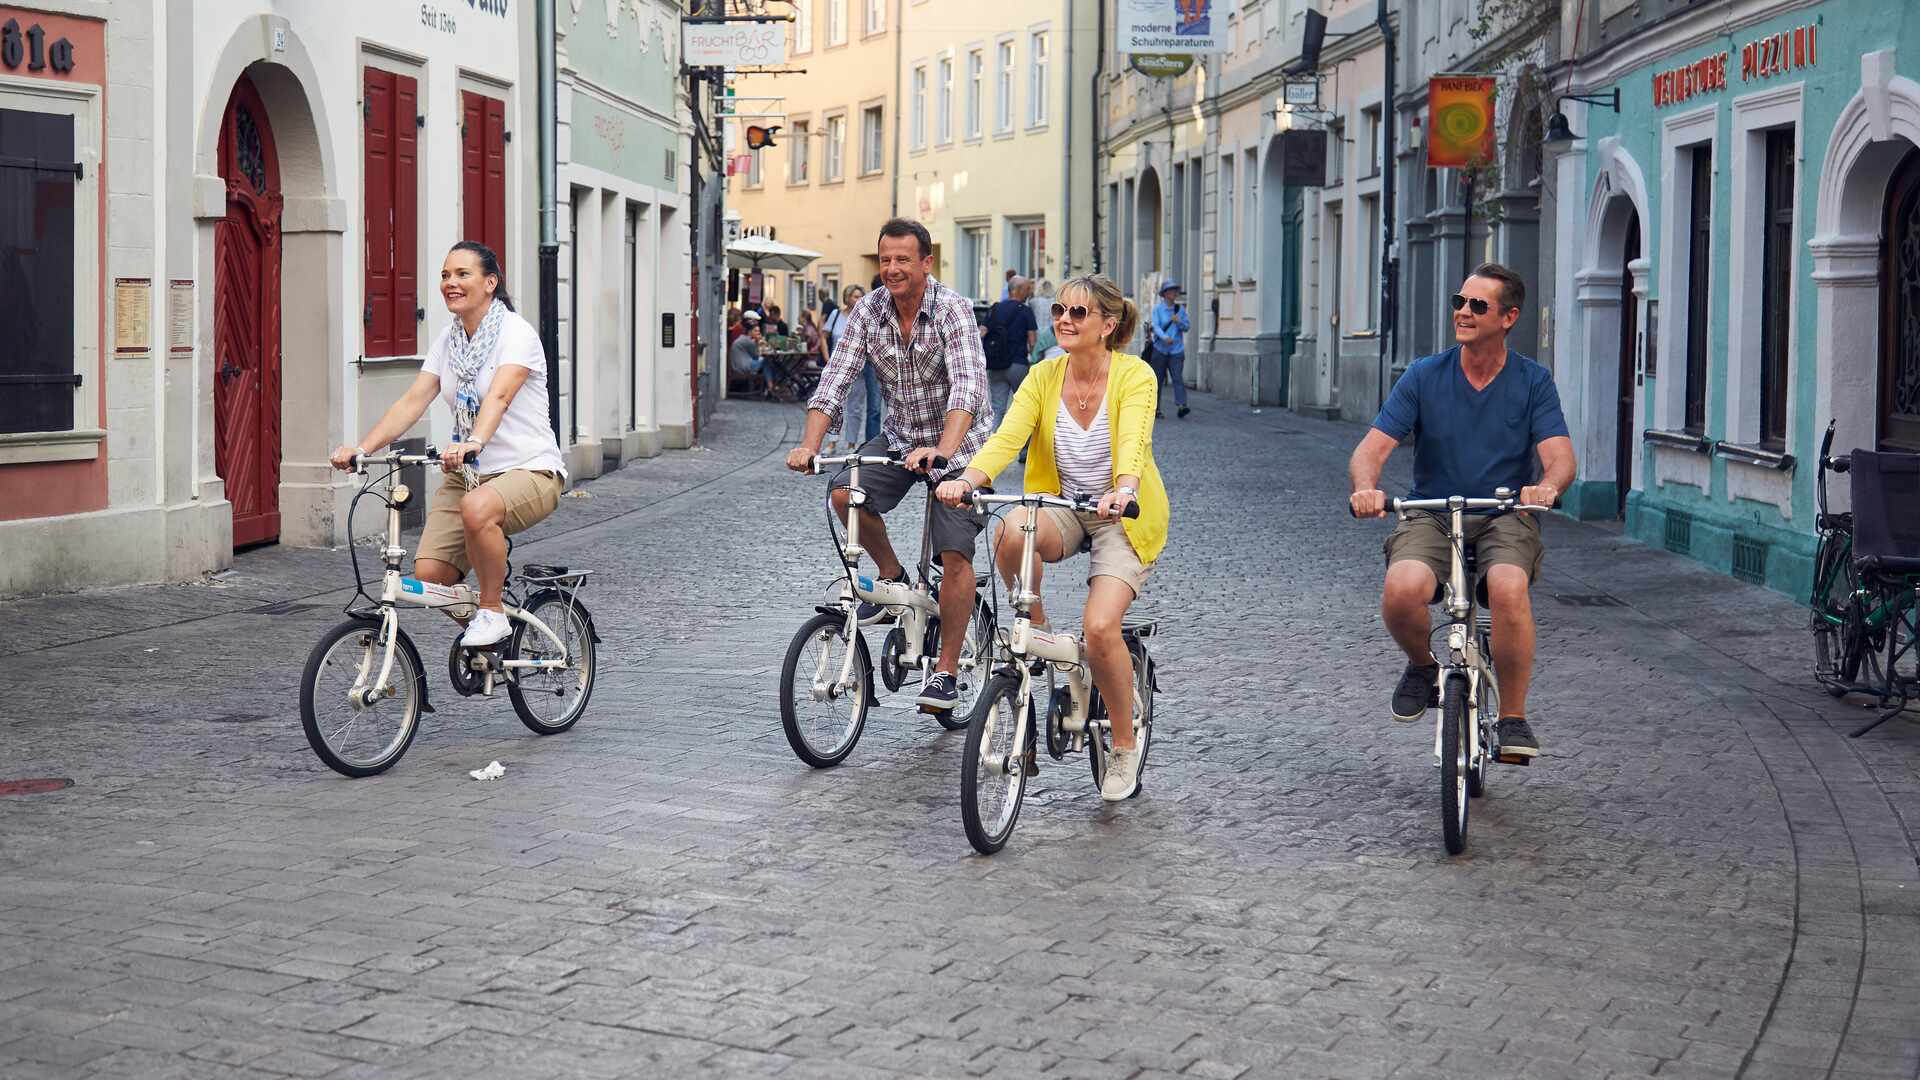 Group cycling through the street in Bamberg Germany